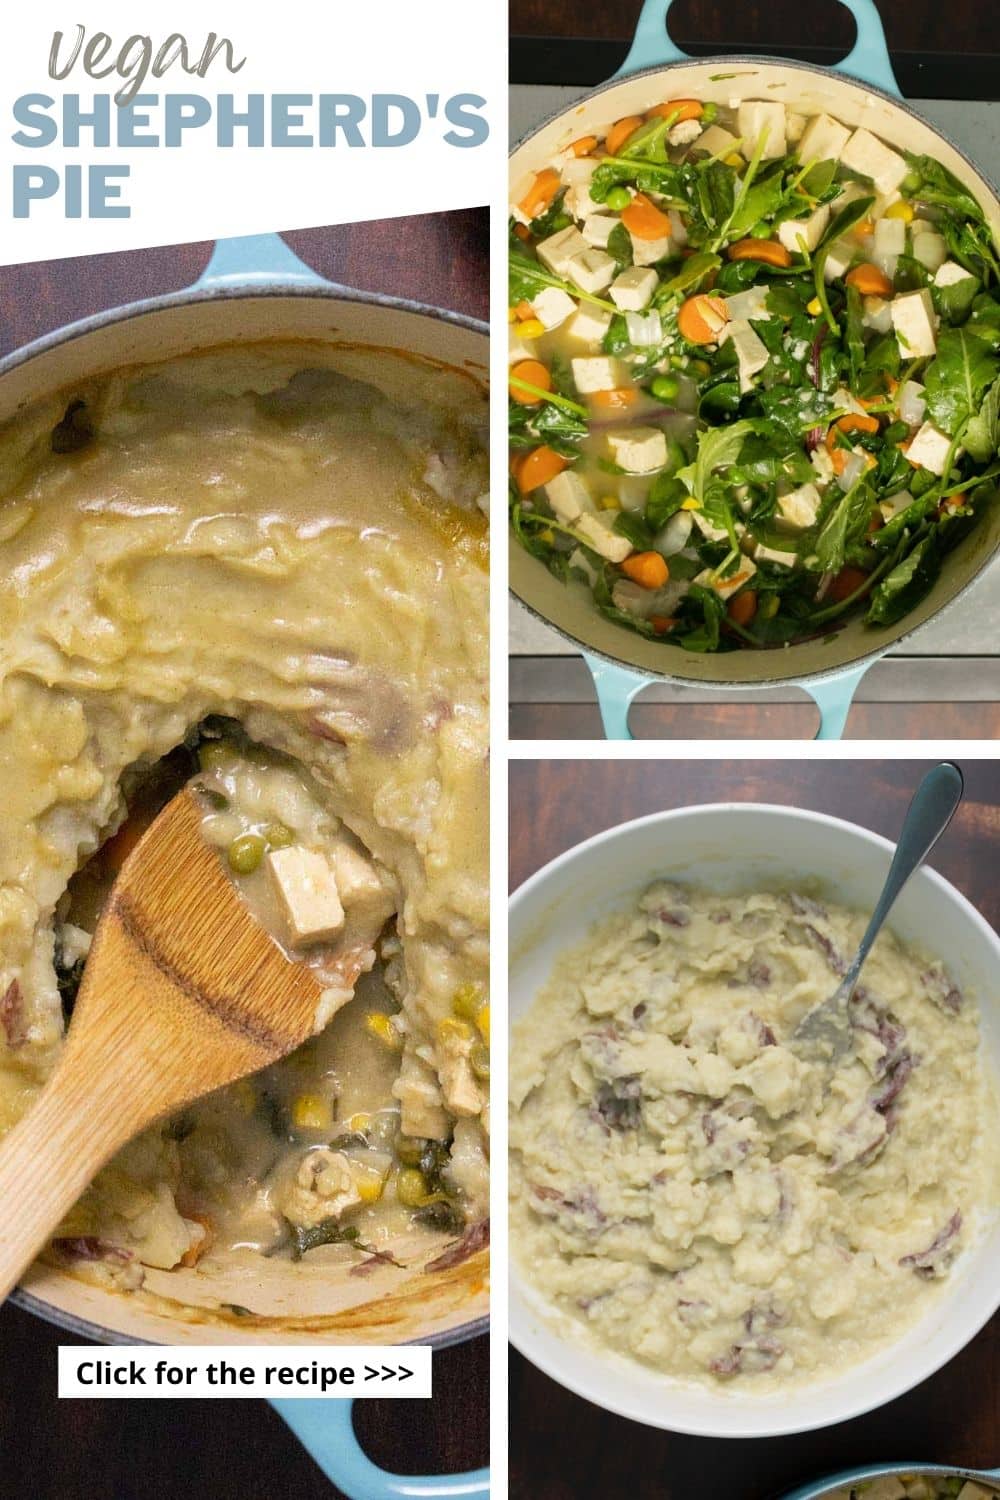 image collage showing mashed potatoes, veggie and tofu filling, and serving the tofu shepherd's pie